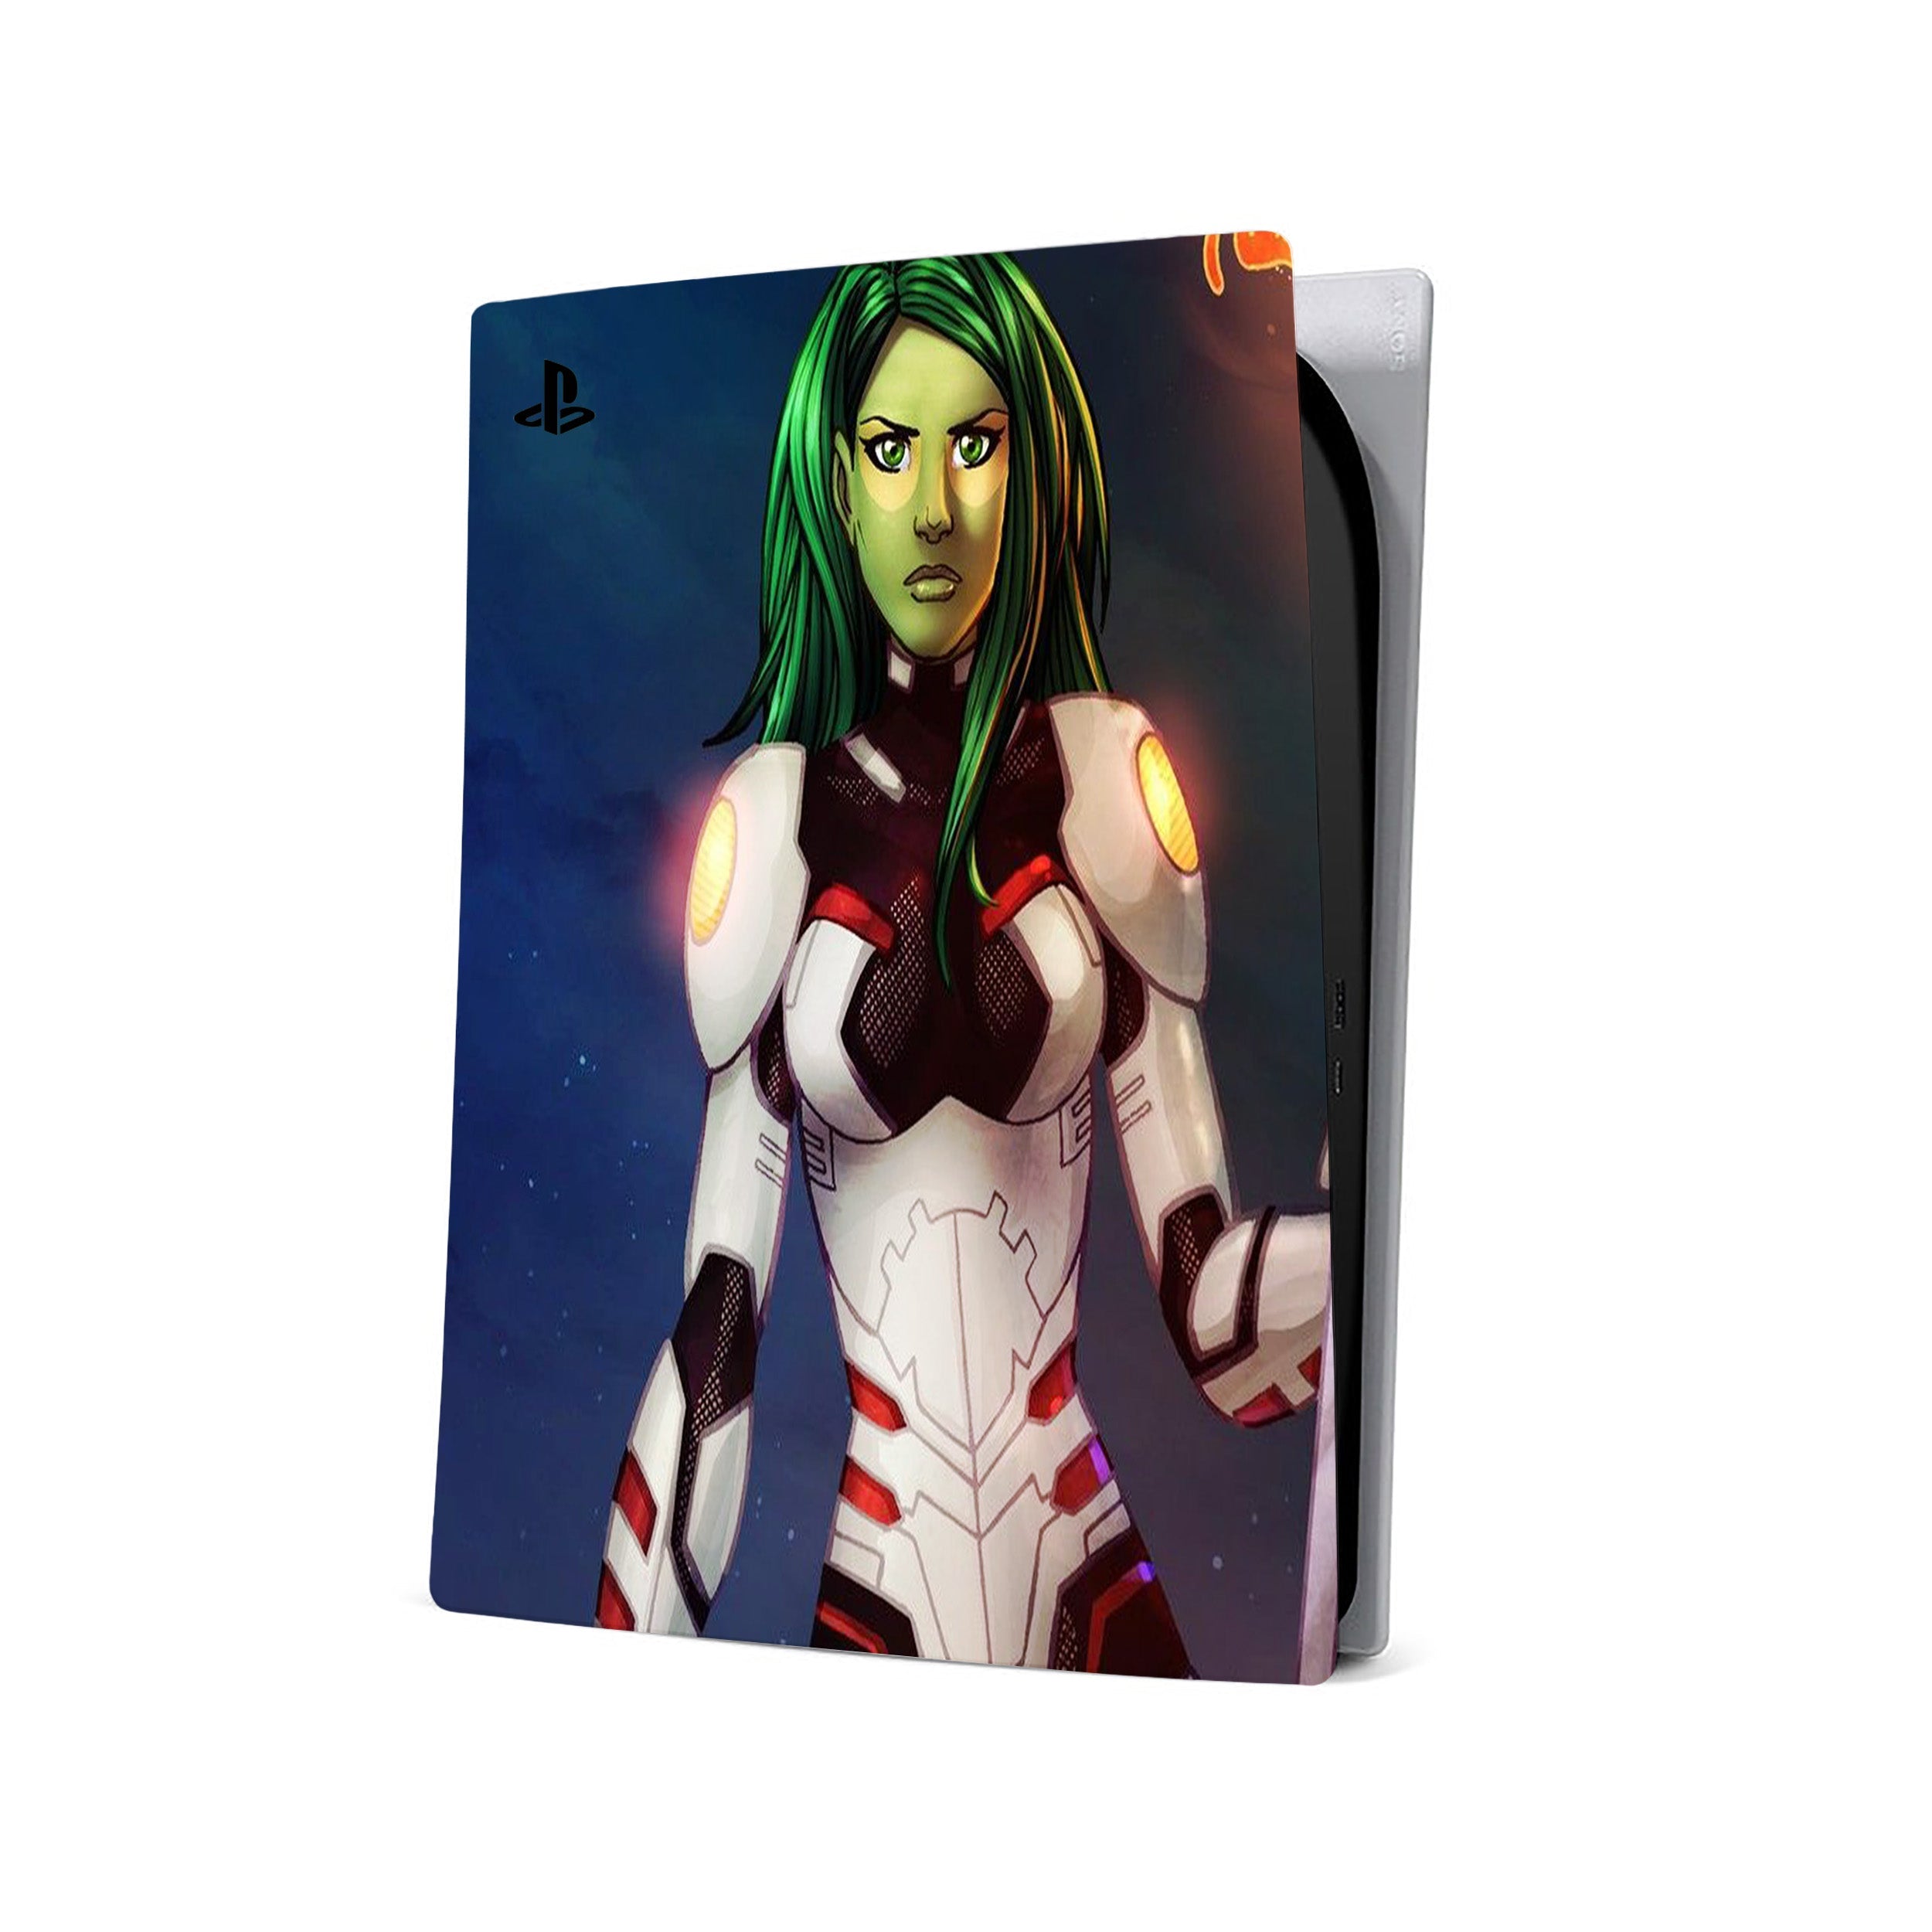 A video game skin featuring a Marvel Guardians of the Galaxy Gamora design for the PS5.